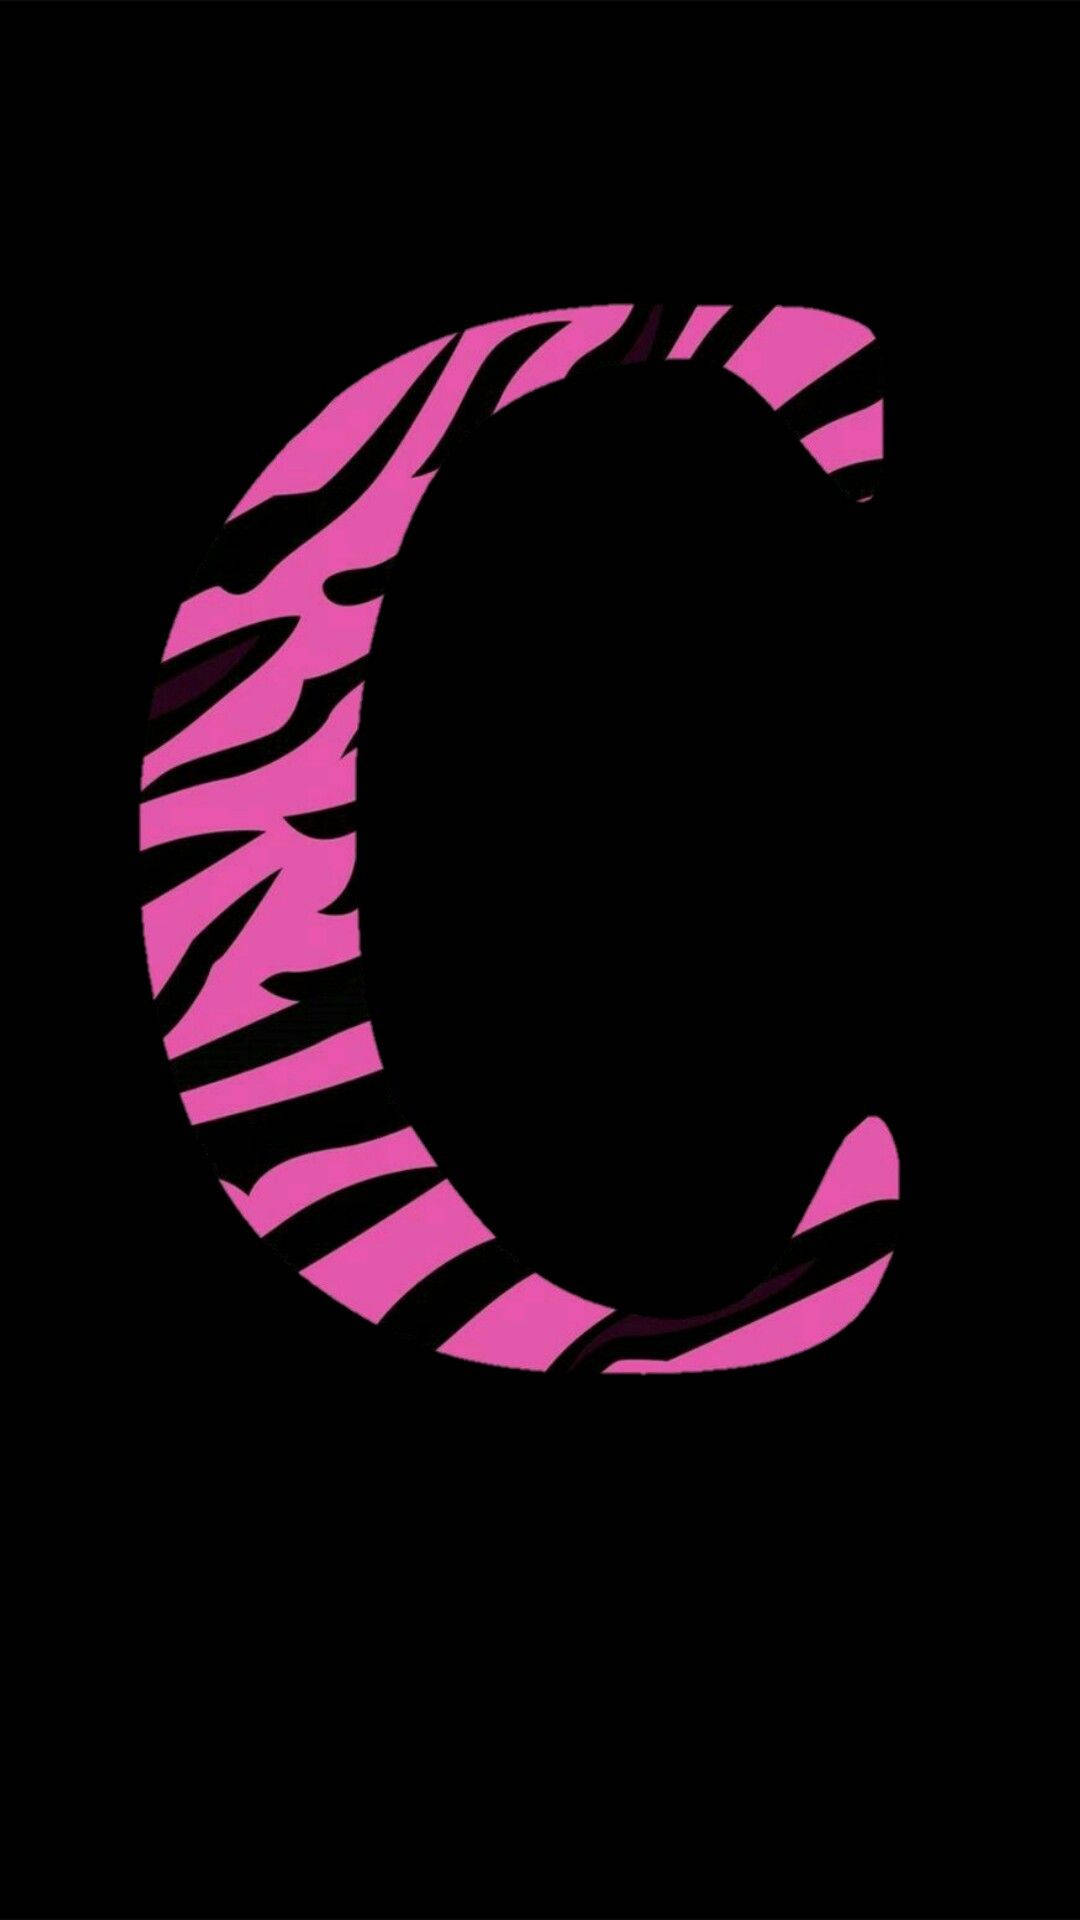 Letter C With Zebra Pattern Background